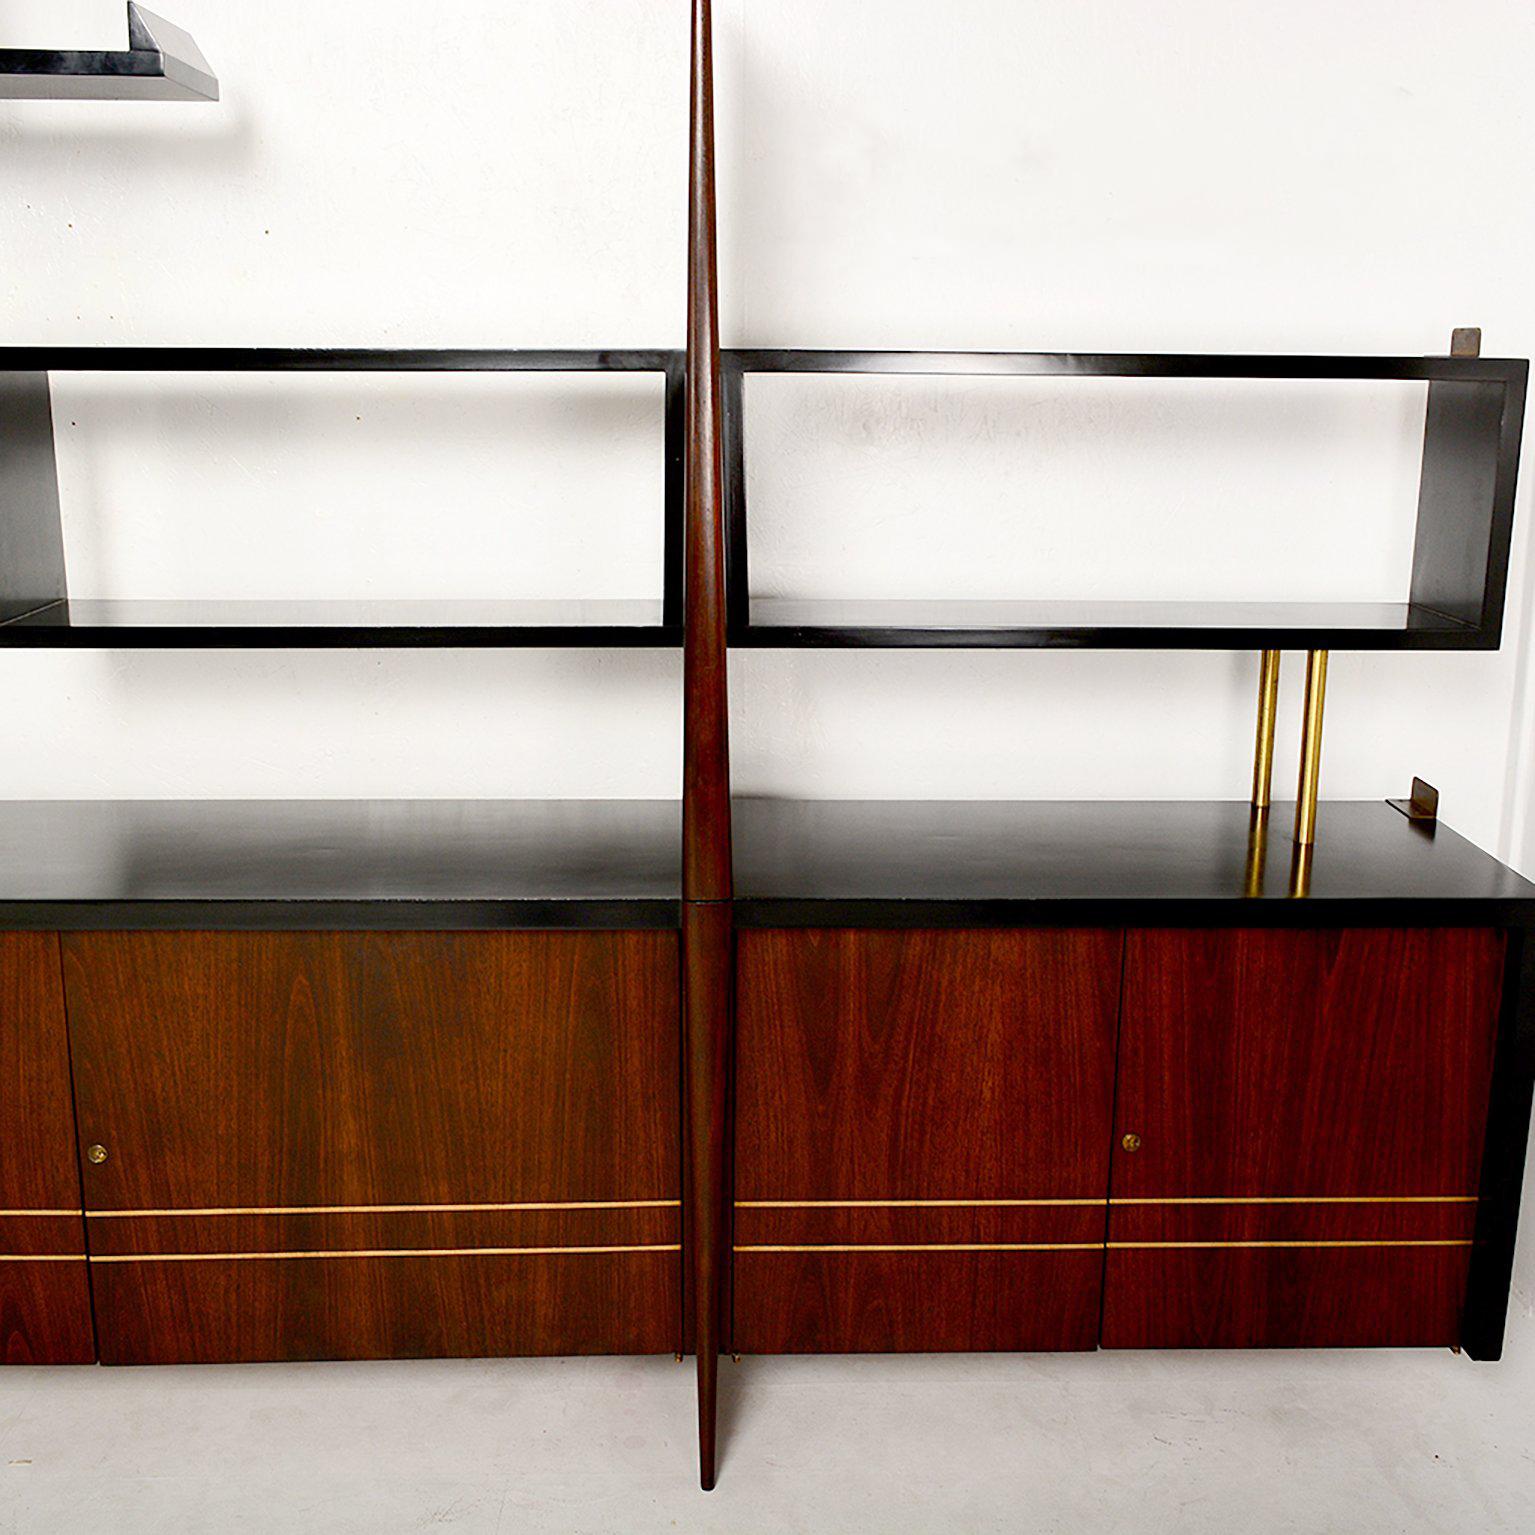 Mid-20th Century Mexican Modernist Wall Unit with Desk, Attributed to Eugenio Escudero